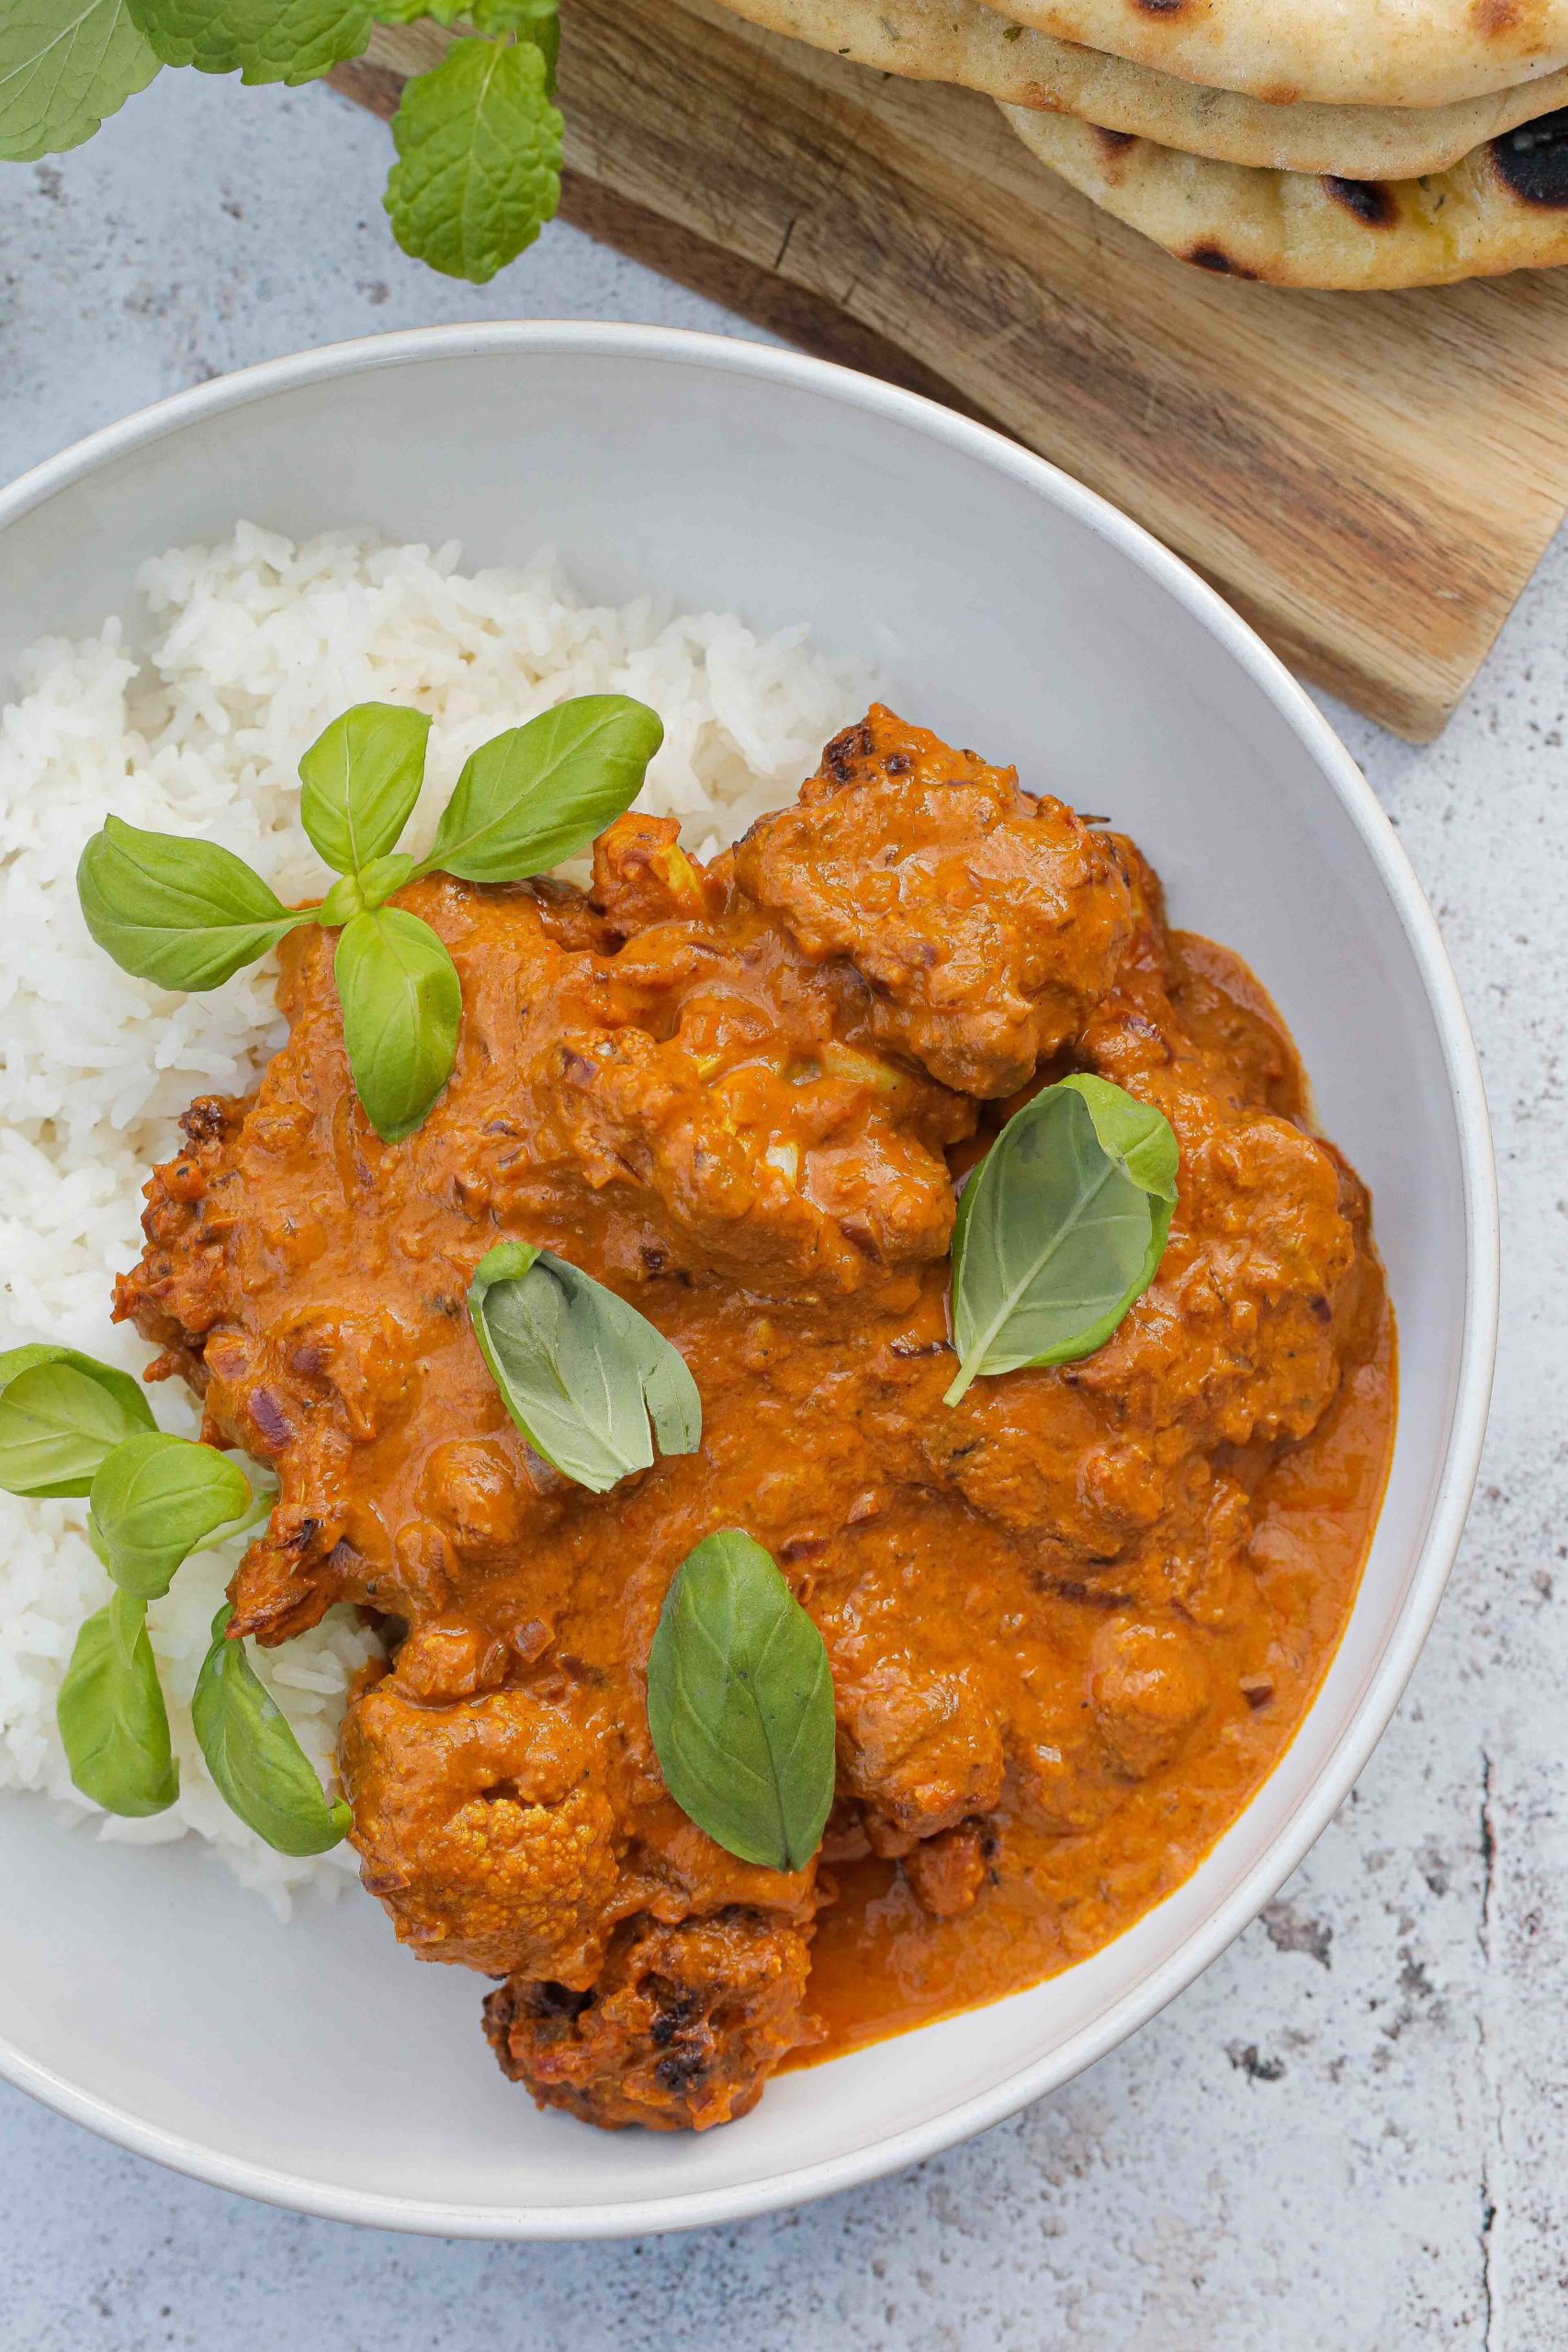 This vegan cauliflower curry in a creamy, spicy tomato sauce is easy to make with simple ingredients and so delicious! Serve with rice and homemade naan bread for a healthy and tasty vegan meal! Recipe on thecookandhim.com | #vegancurry #cauliflowercurry #veganbutterchicken #veganrecipes #homemadecurry